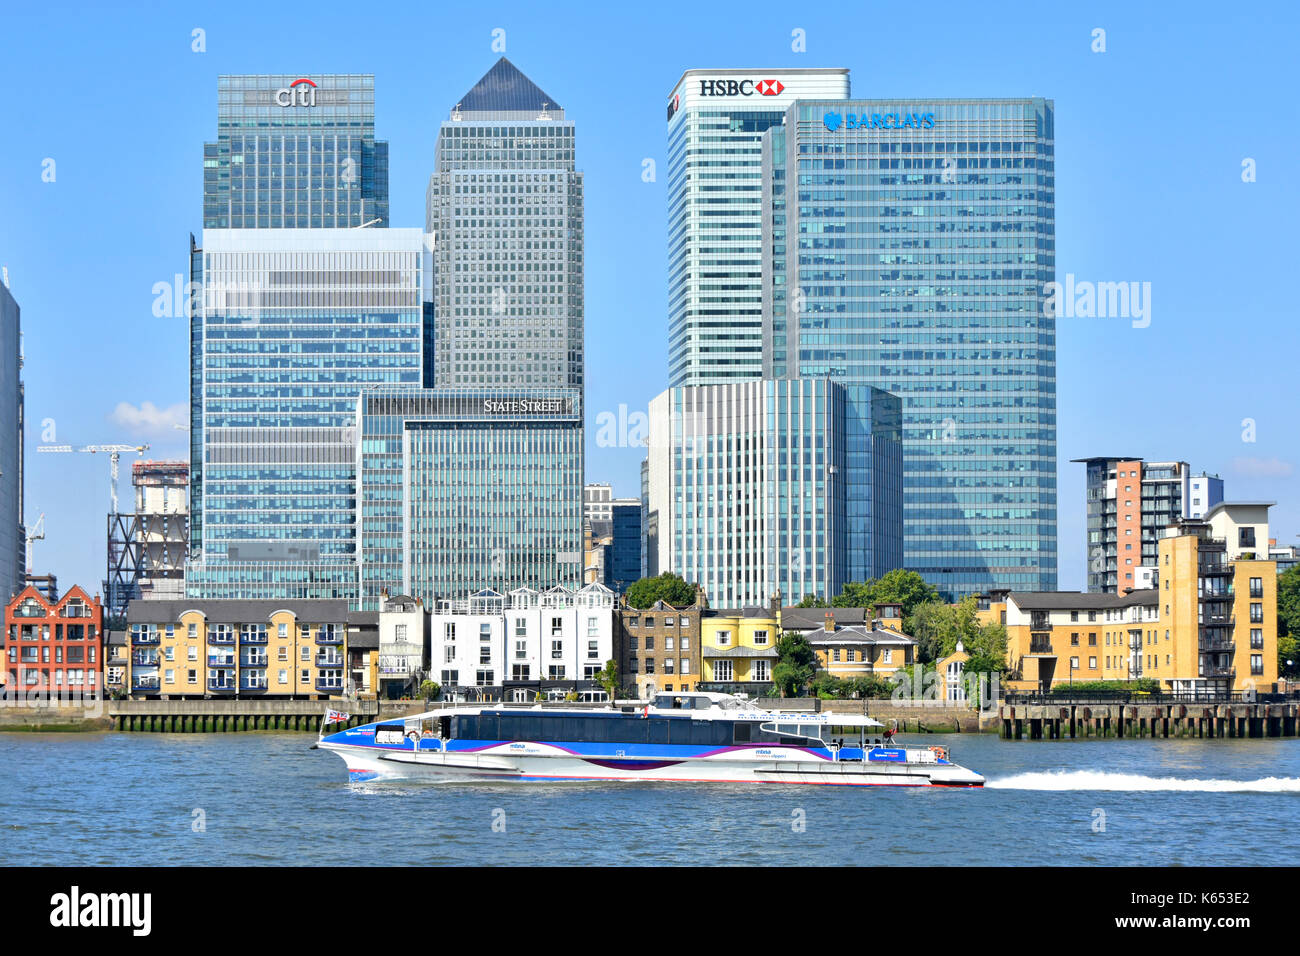 River Thames & London Docklands Canary Wharf skyline of modern landmark banking skyscraper buildings & Thames Clipper fast river bus Isle of Dogs UK Stock Photo